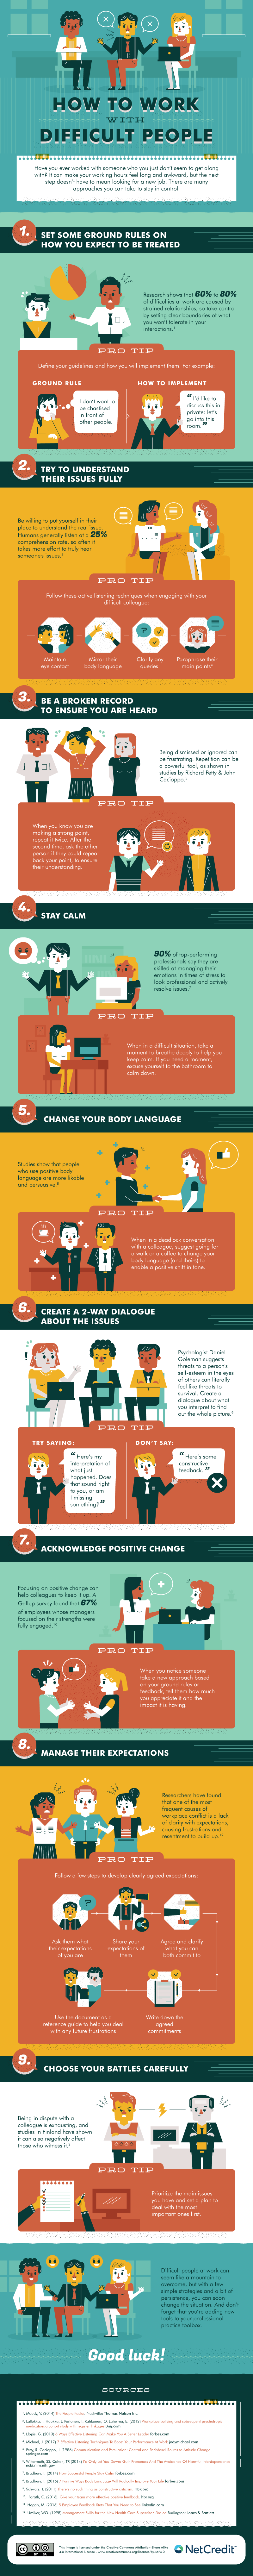 DESIGN - How to Work With Difficult People